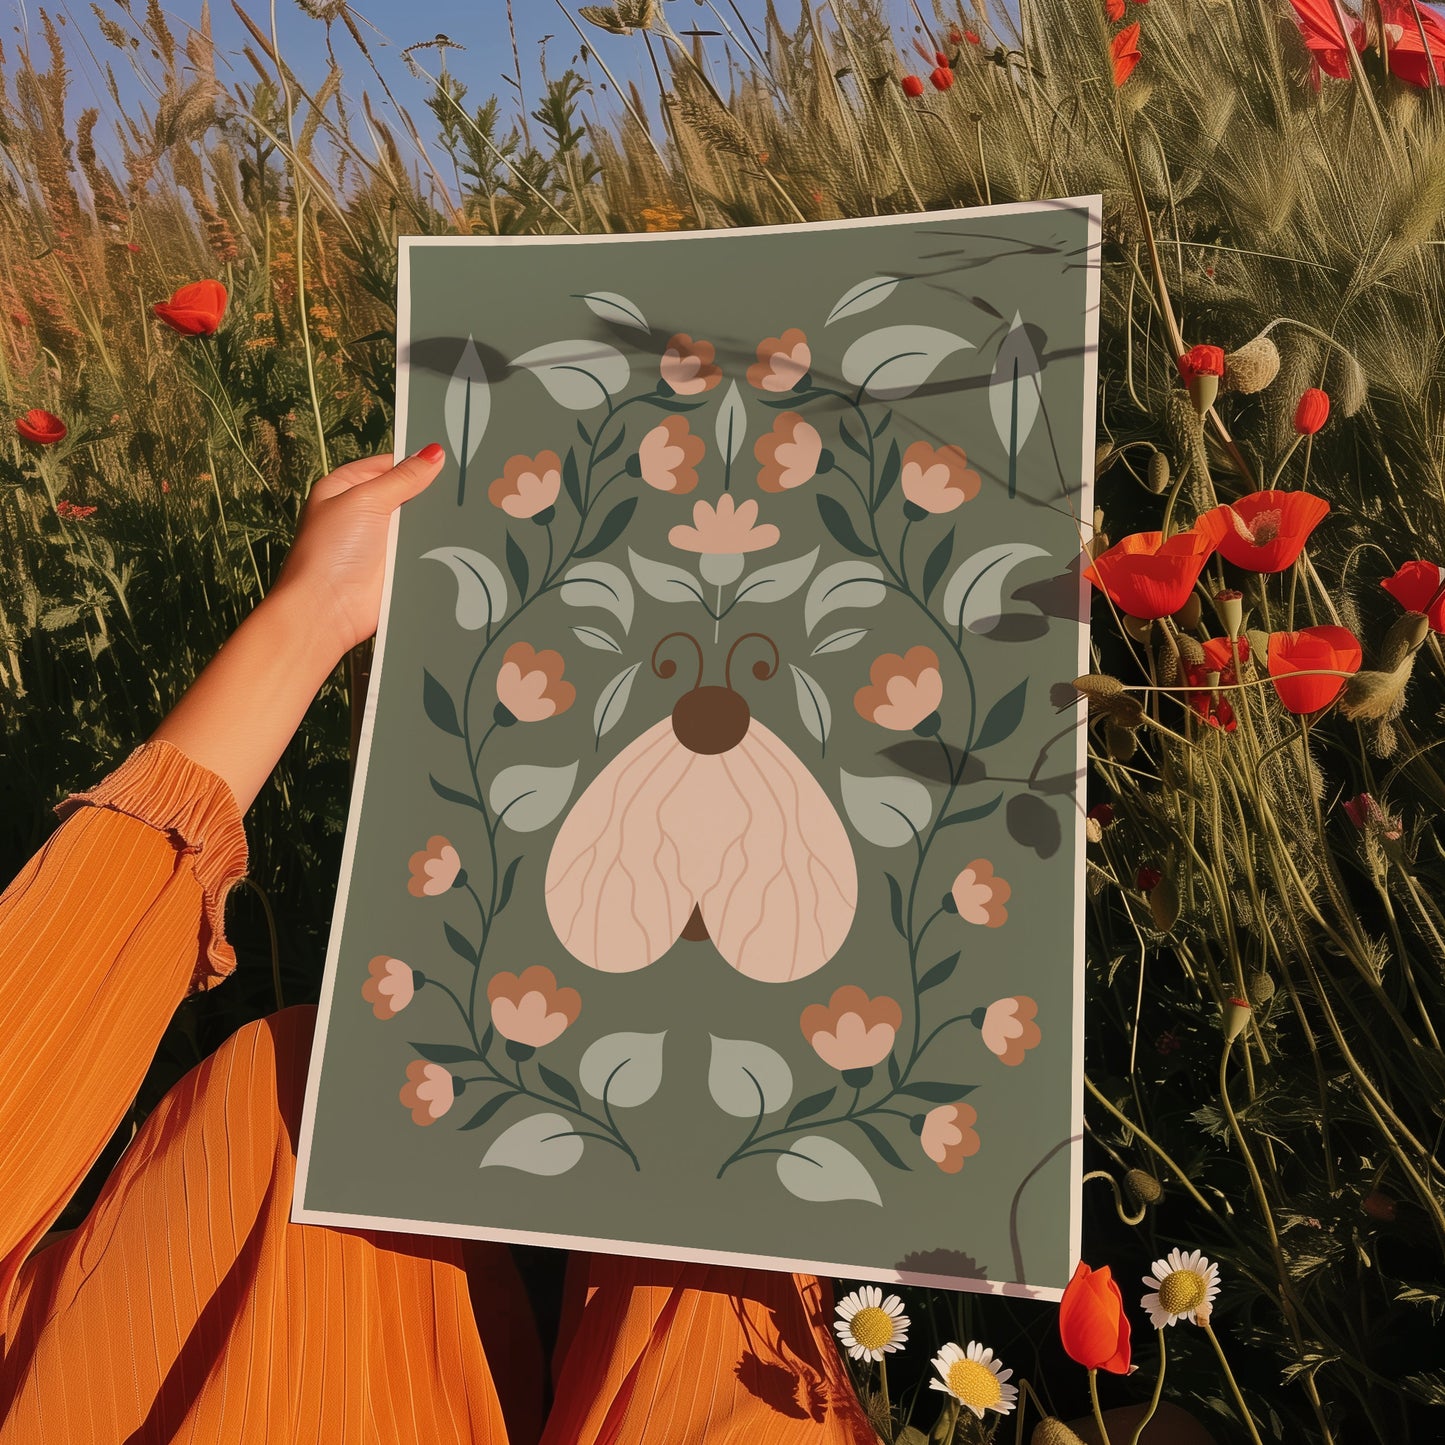 Moth and Flowers No. 3 Poster